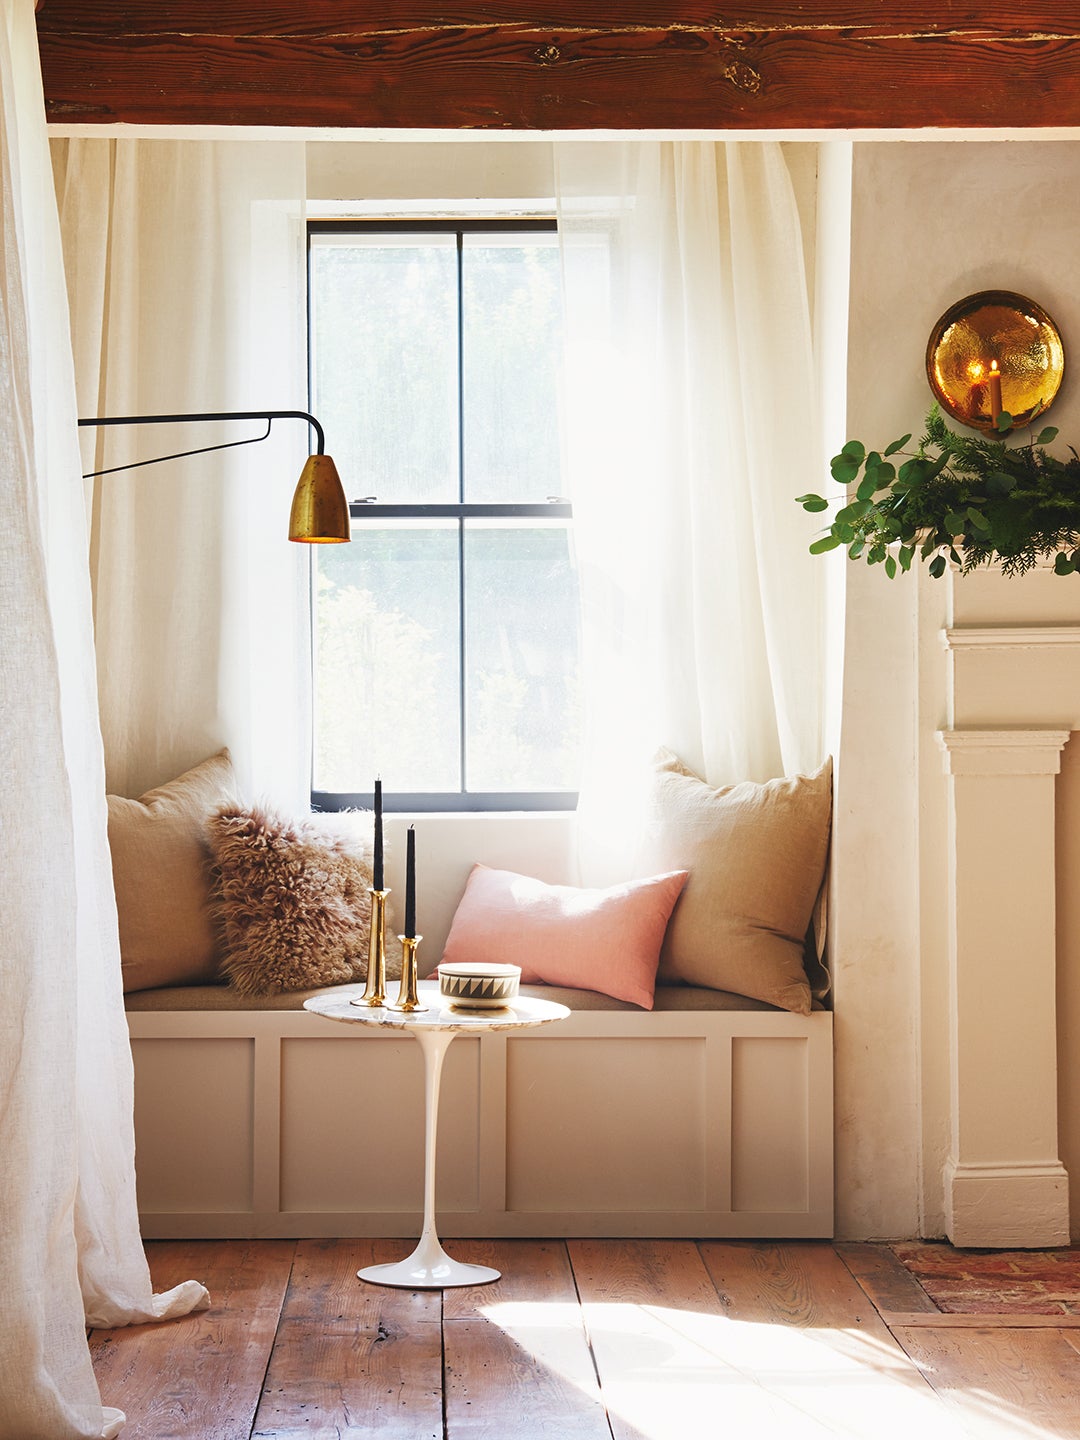 built-in window seat with pink pillows